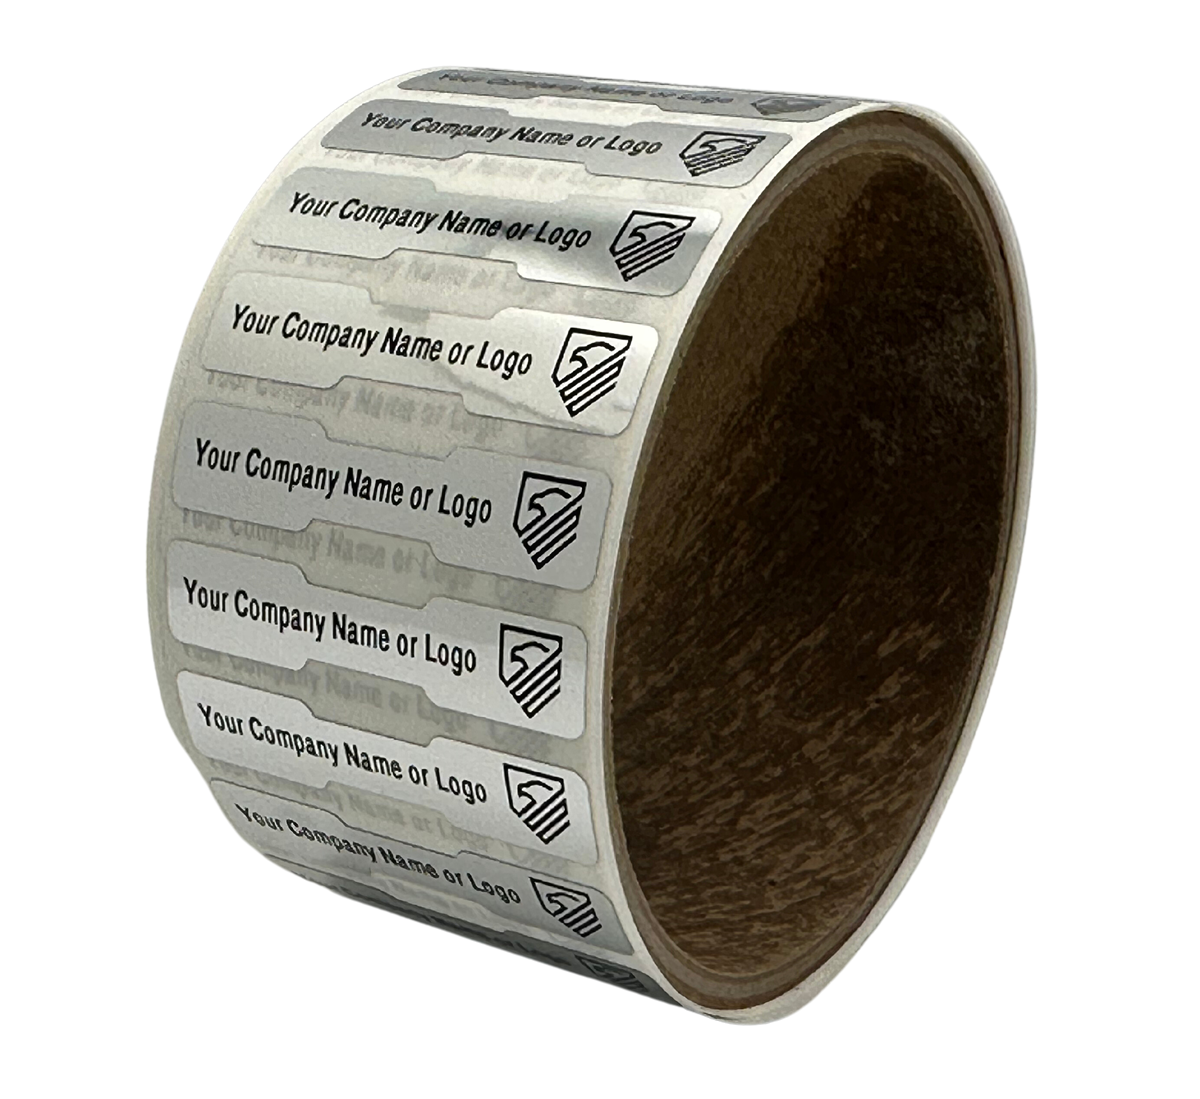 5,000 Tamper Evident Security Labels Silver Chrome TamperVoidPro Seal Sticker, Dogbone Shape Size 1.75" x 0.375 (44mm x 9mm). Custom Printed. >Click on item details to customize.